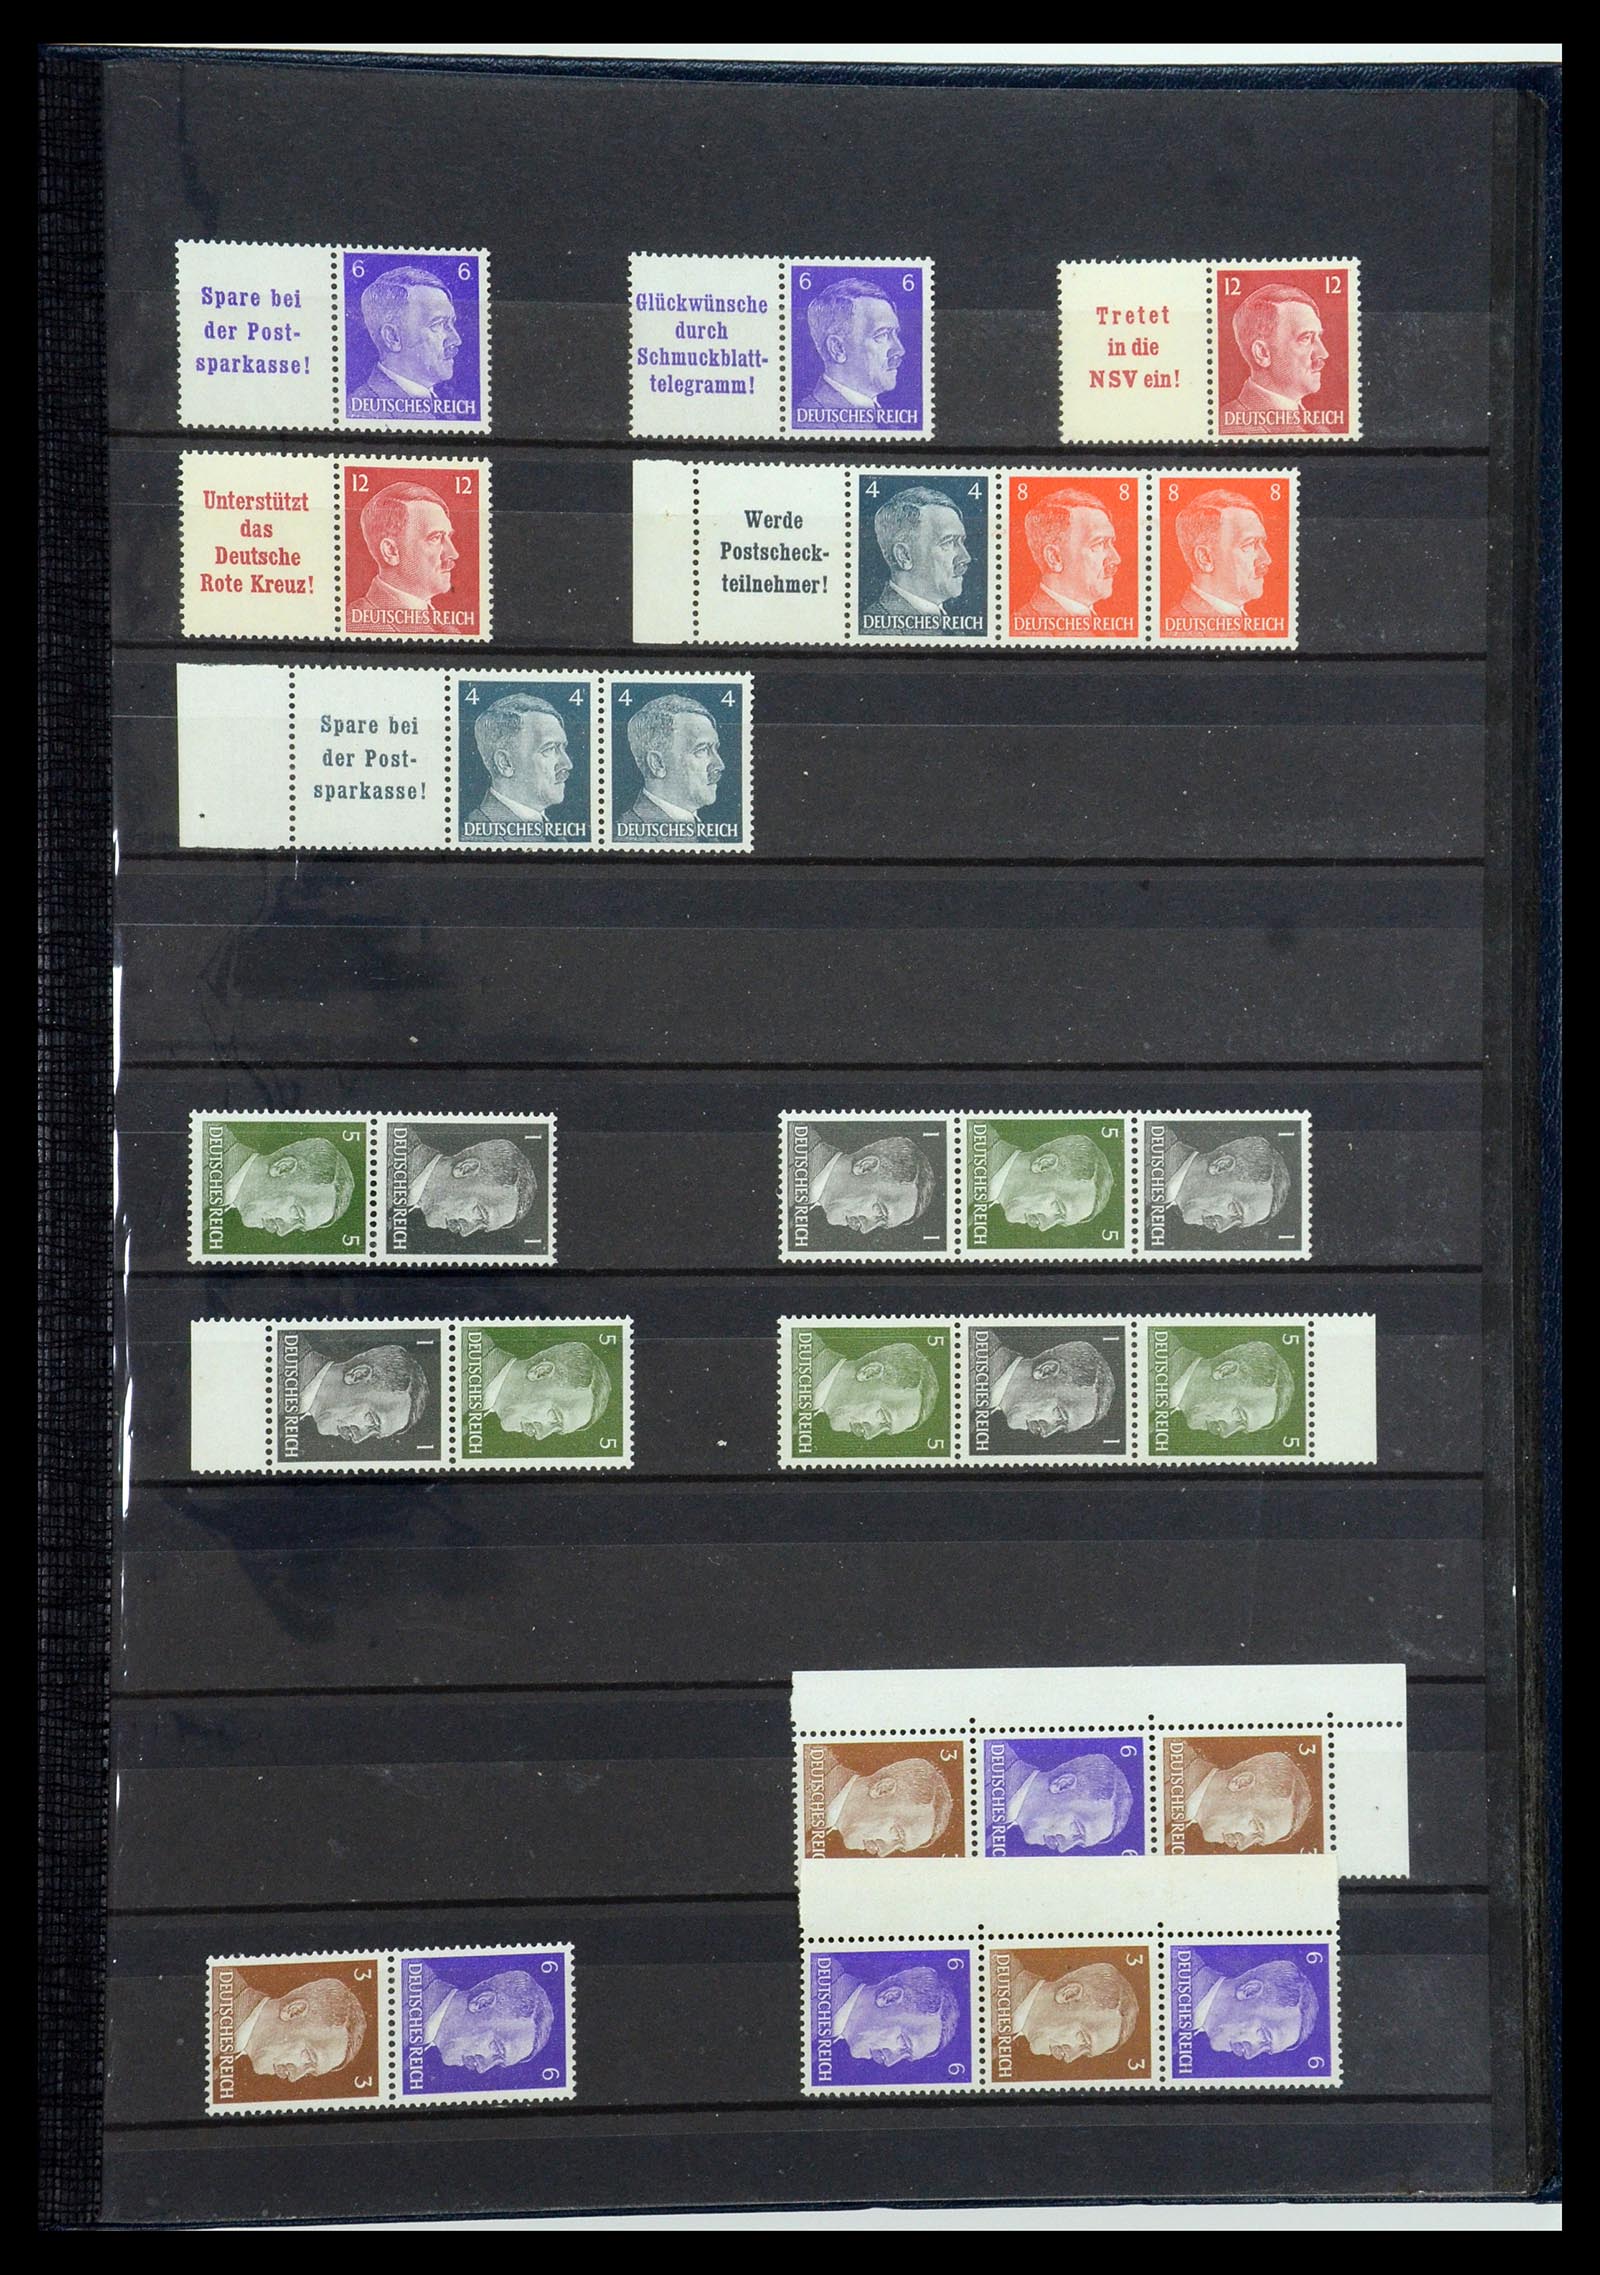 35850 035 - Stamp Collection 35850 German Reich booklets and combinations 1910-1941.